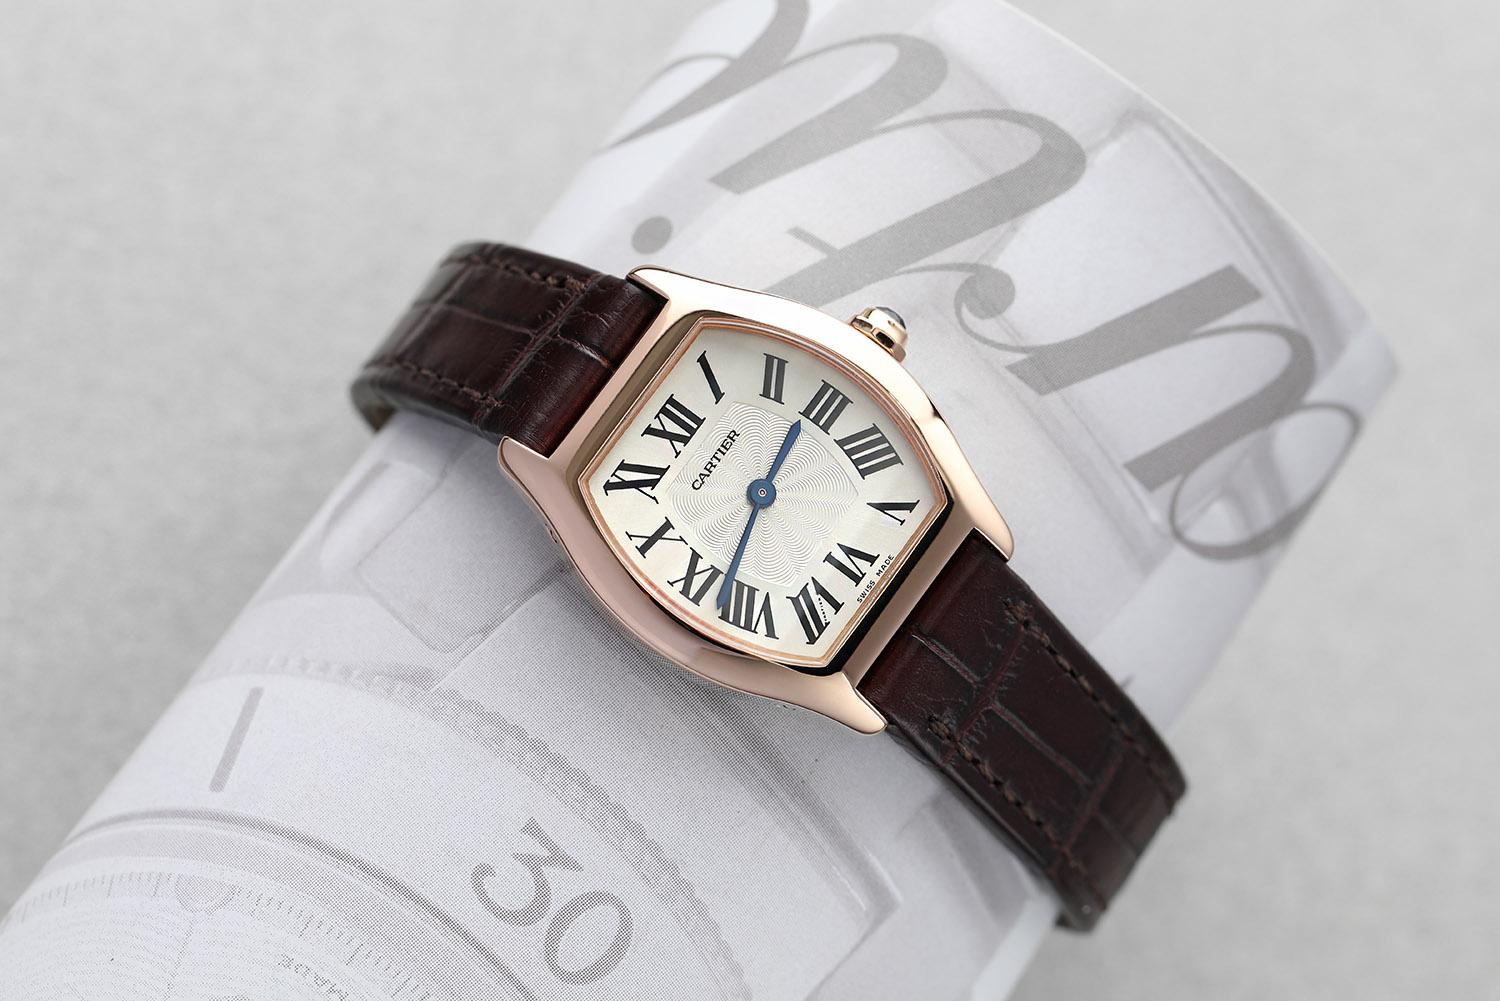 cartier watch ladies leather strap